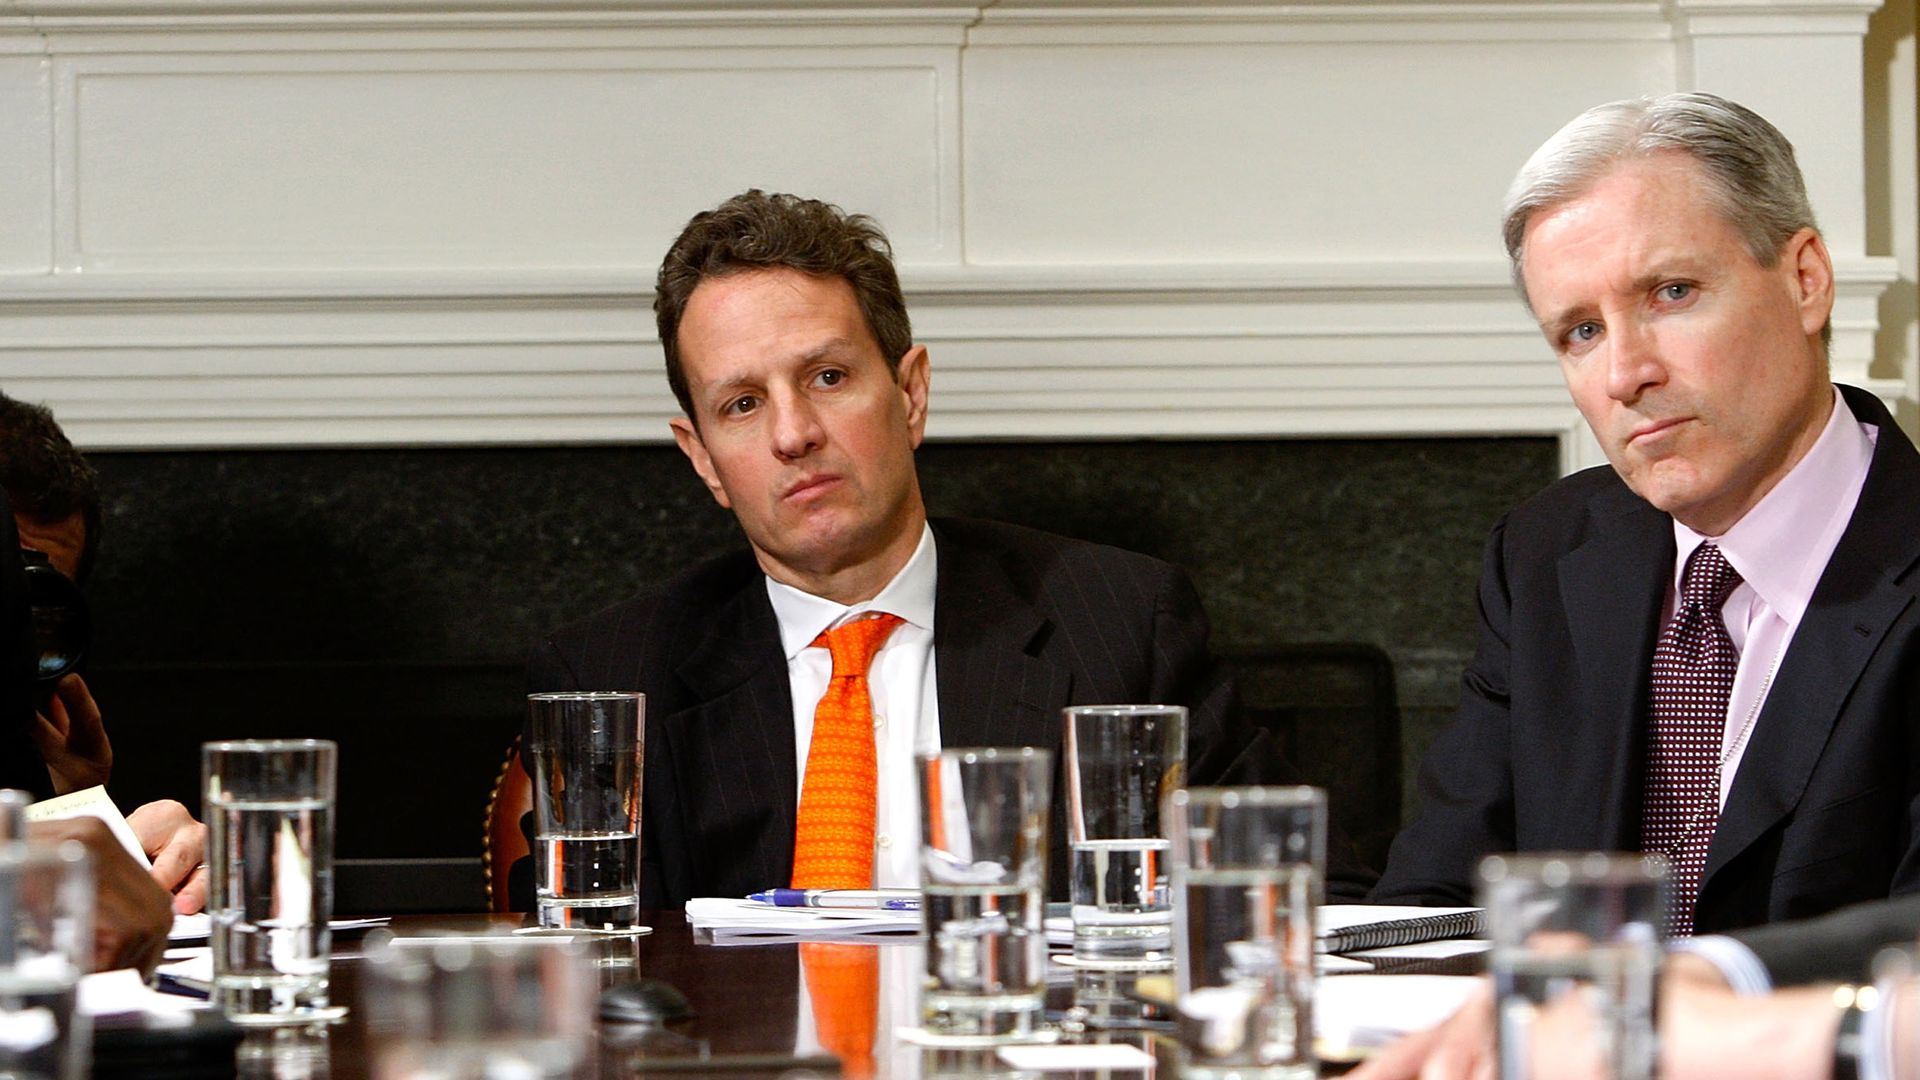 Mark Gallogly (right) is seen sitting with former Treasury Secretary Timothy Geithner.